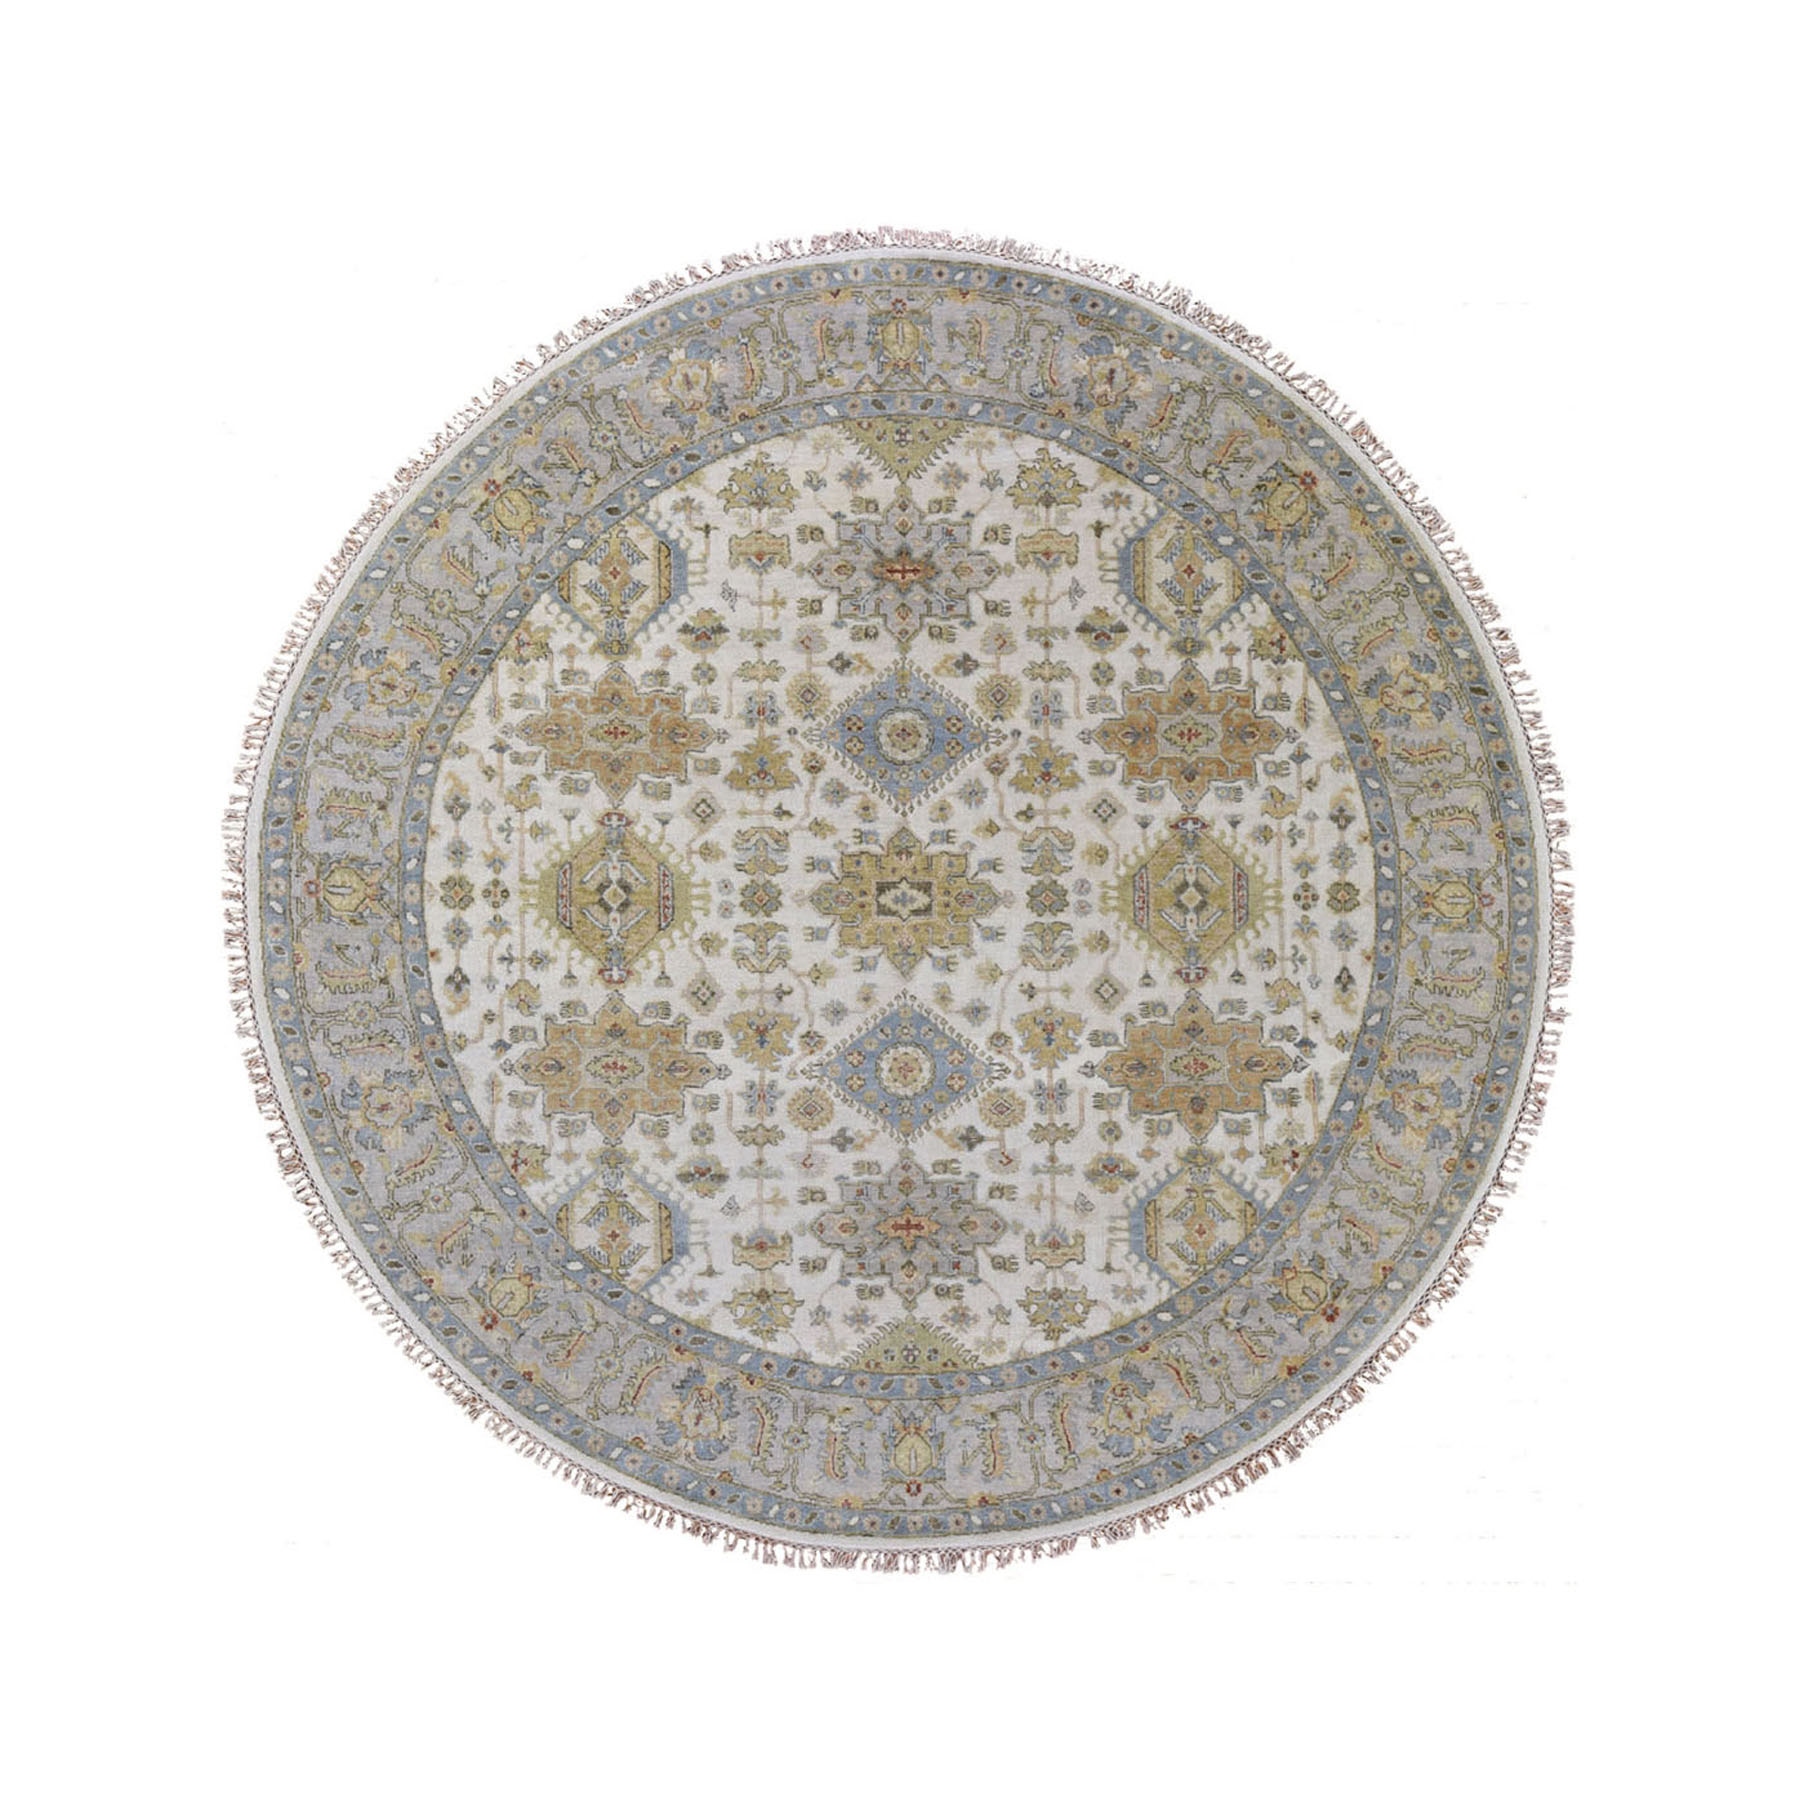 7'2"X7'2" Round Ivory Karajeh Design Pure Wool Hand Knotted Oriental Rug moad886c